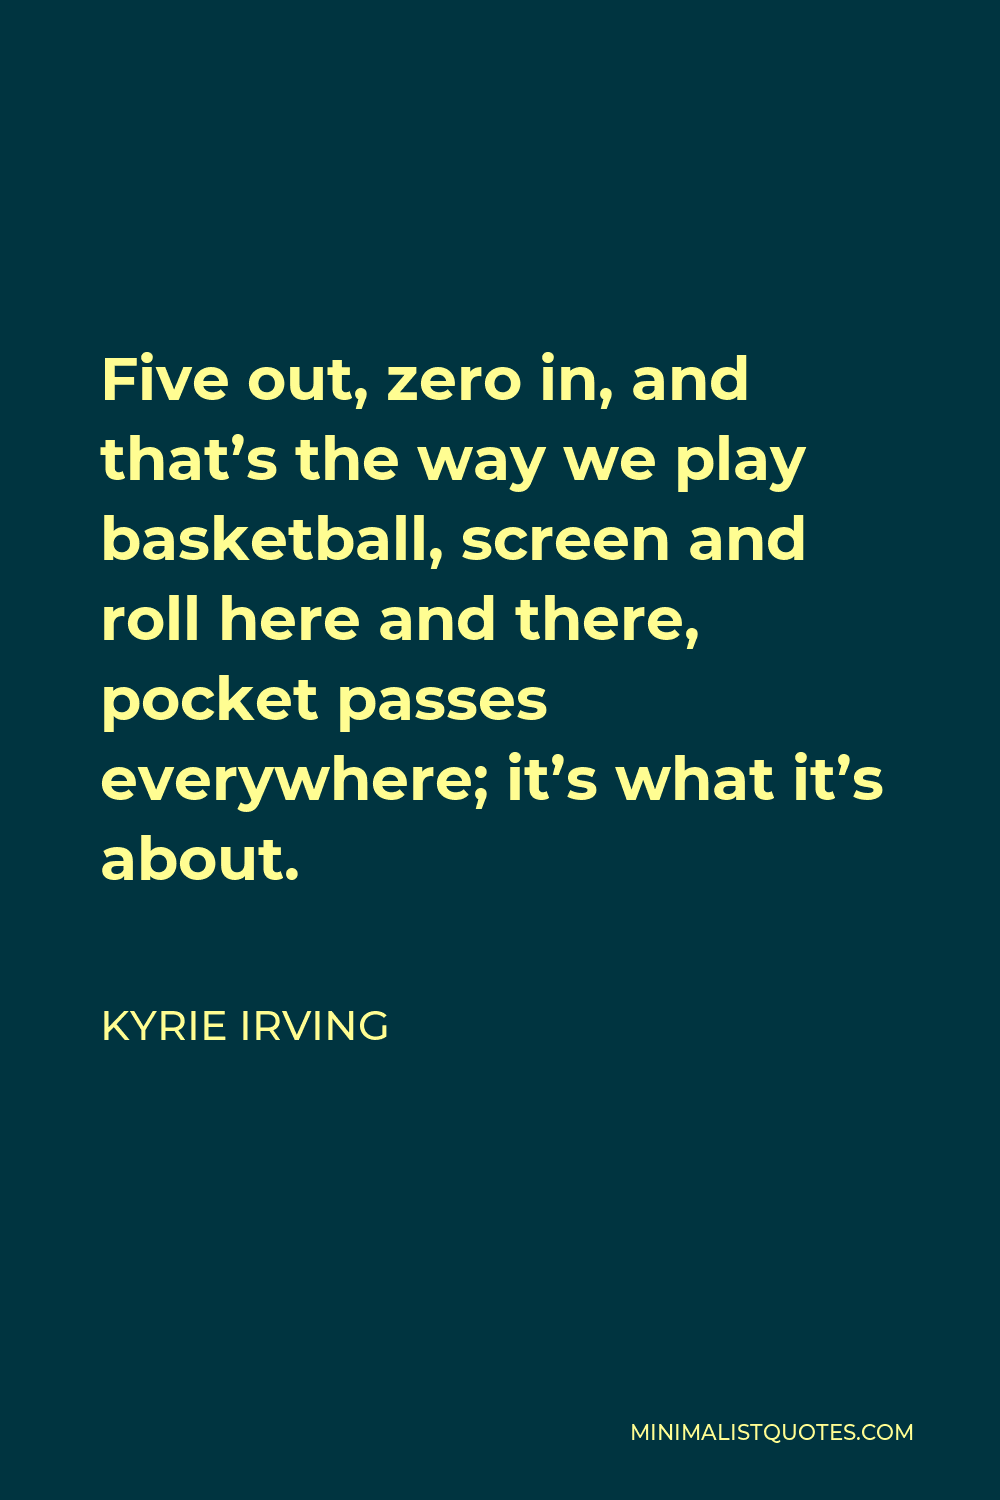 Kyrie Irving Quote - Five out, zero in, and that’s the way we play basketball, screen and roll here and there, pocket passes everywhere; it’s what it’s about.